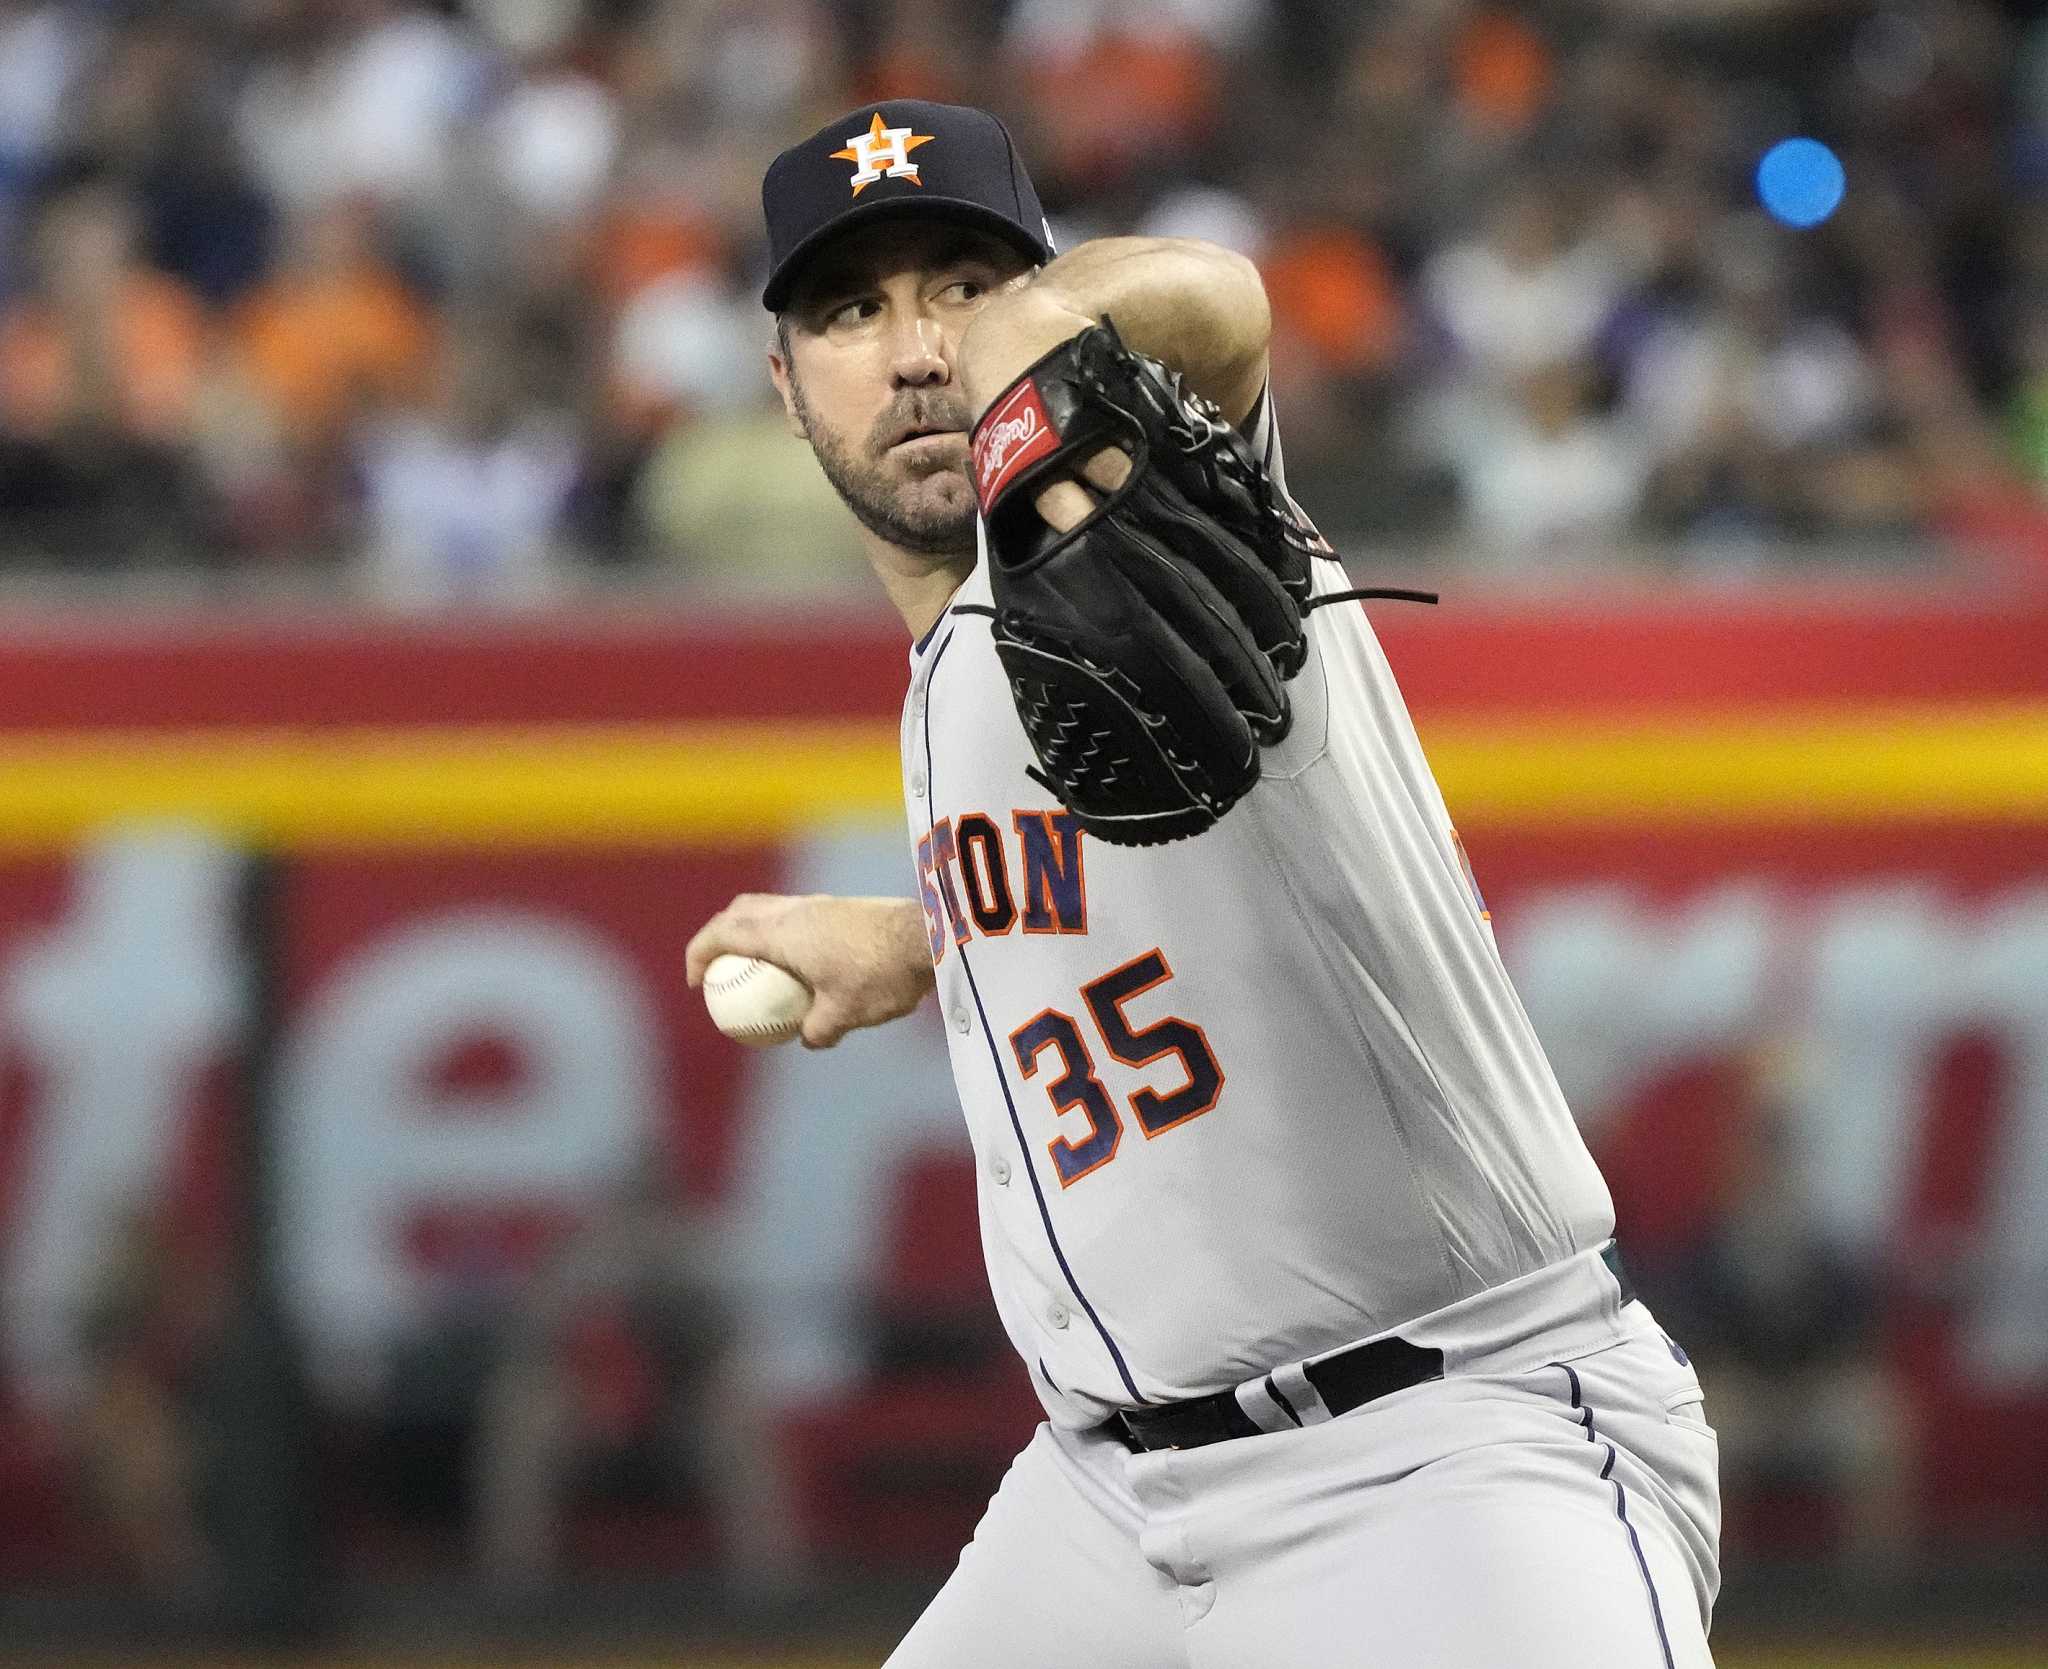 Pitching matchups for the Diamondbacks-Astros series in Houston